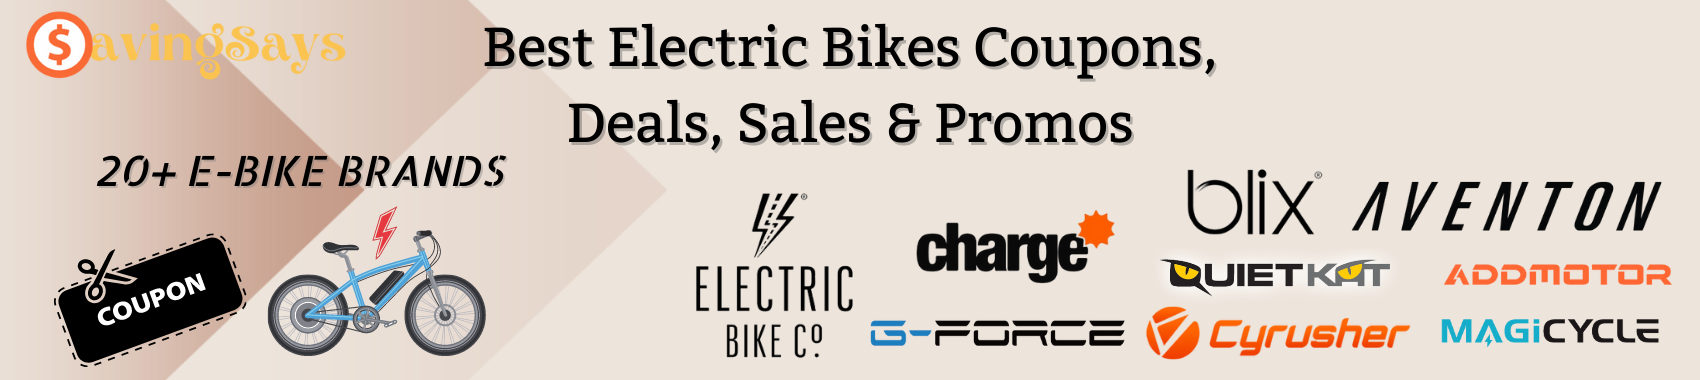 Best Electric Bike Coupons